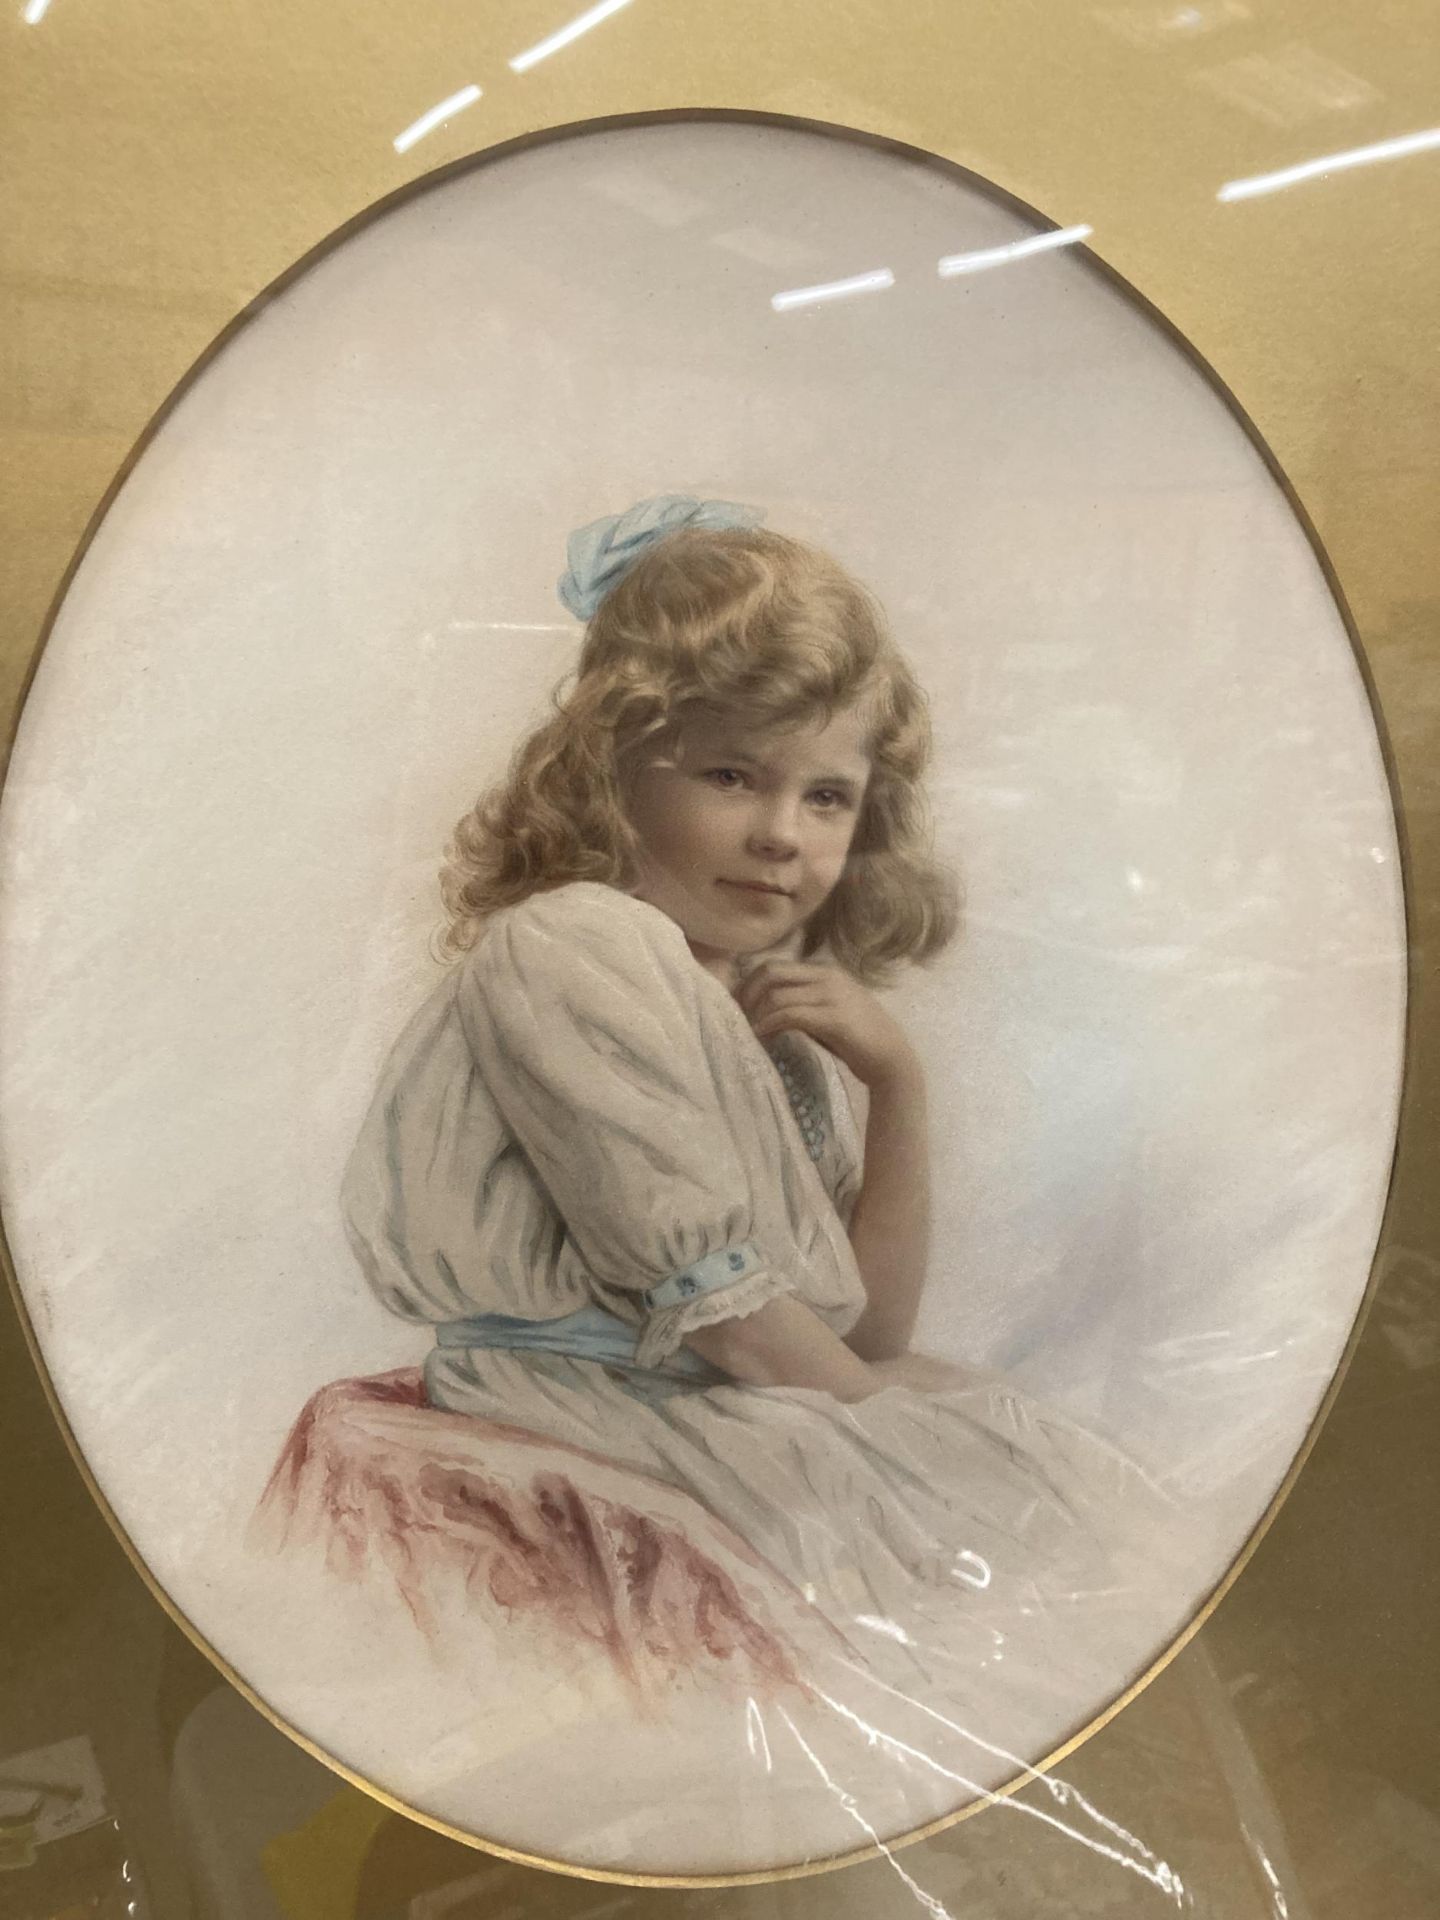 A GILT FRAMED PRINT OF A YOUNG GIRL - Image 2 of 3